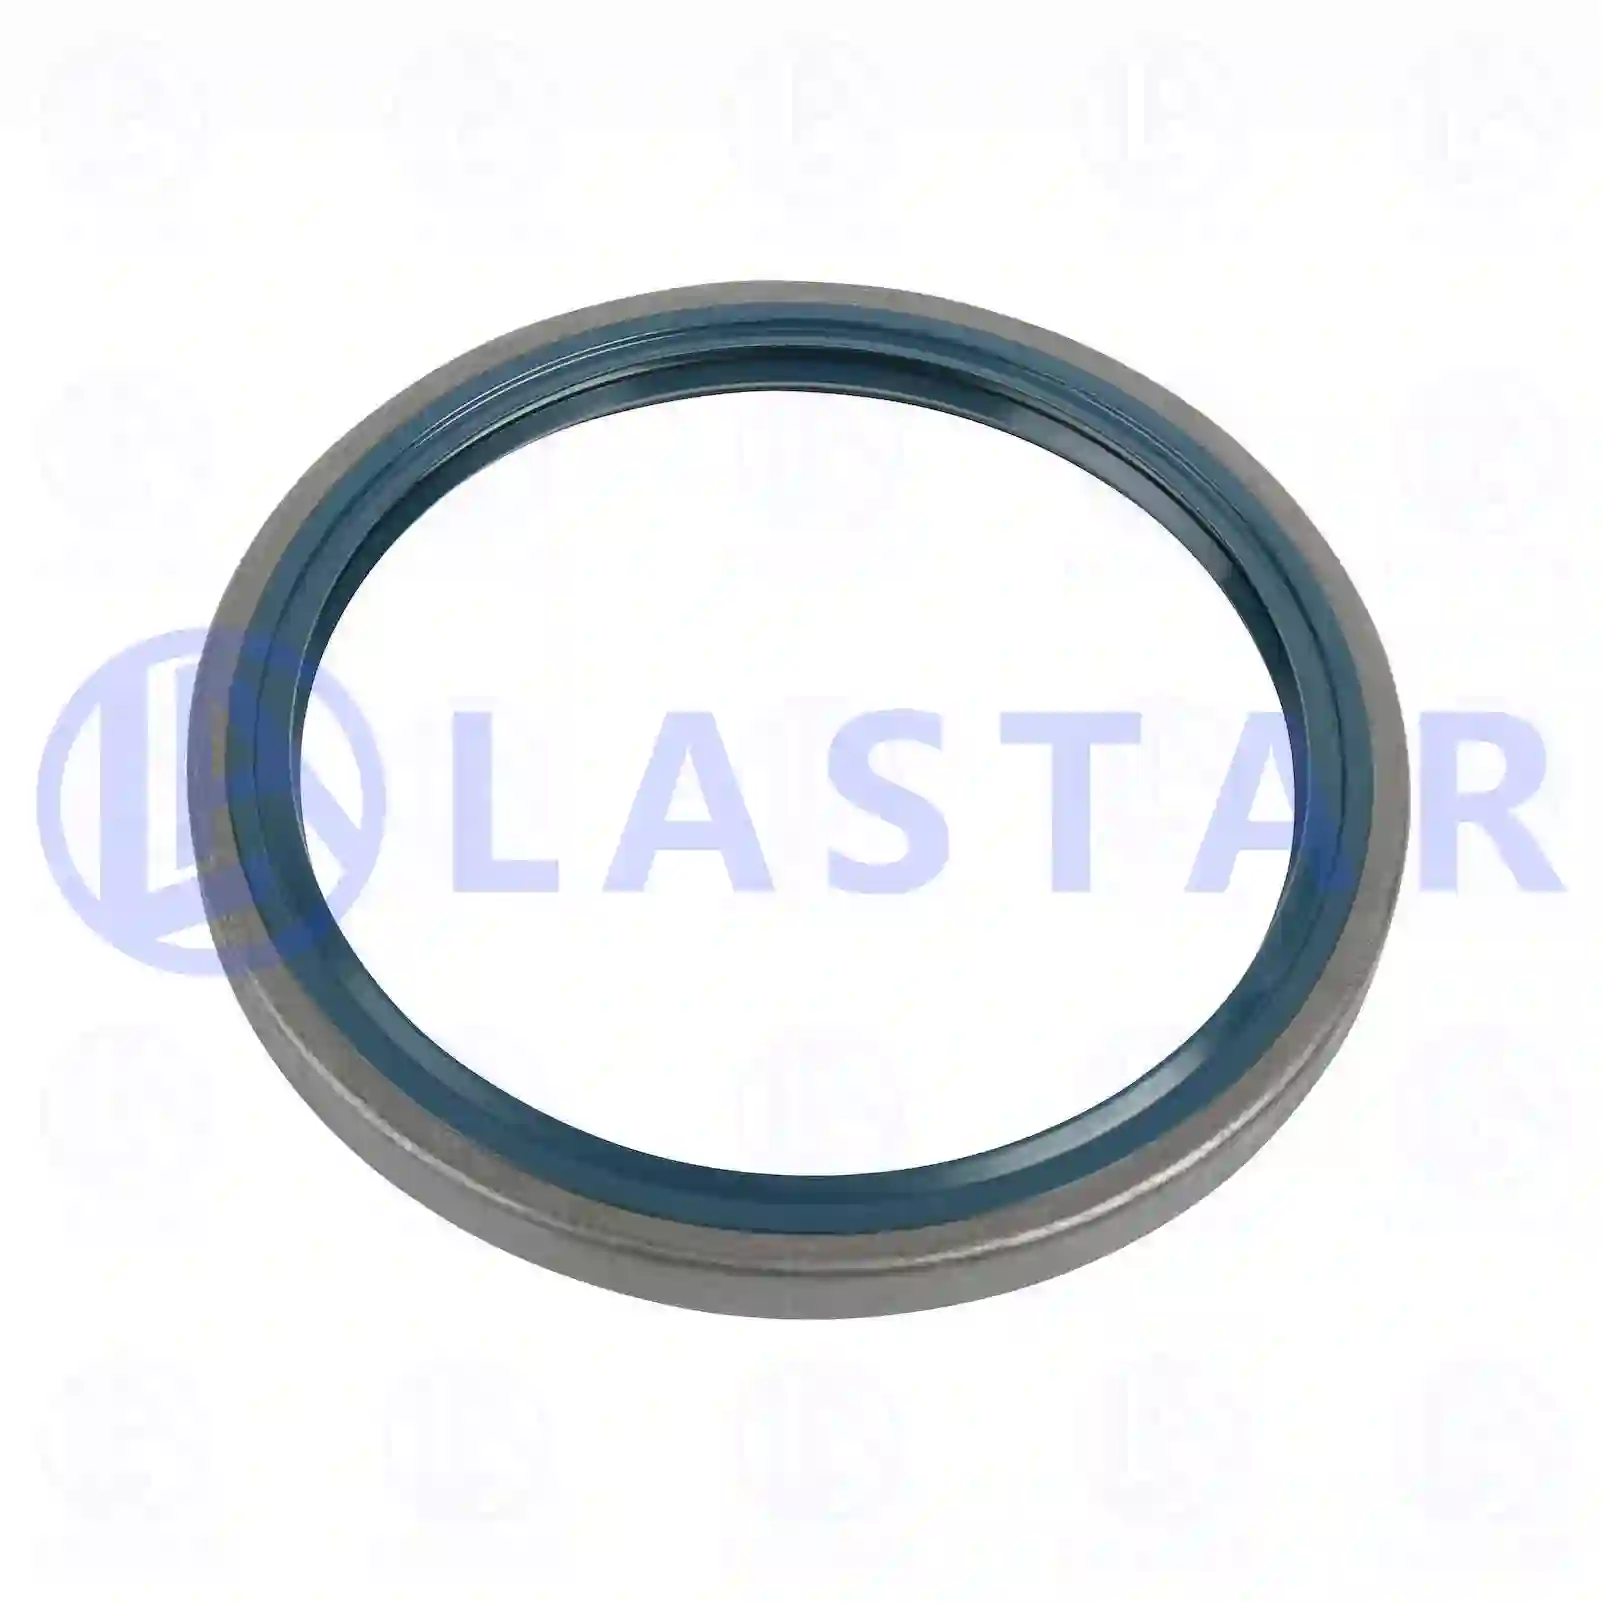 Oil seal, 77726515, 40001931, 40001931, 40001933, 40001931, 06562890038, 4343000800, 4373000800 ||  77726515 Lastar Spare Part | Truck Spare Parts, Auotomotive Spare Parts Oil seal, 77726515, 40001931, 40001931, 40001933, 40001931, 06562890038, 4343000800, 4373000800 ||  77726515 Lastar Spare Part | Truck Spare Parts, Auotomotive Spare Parts